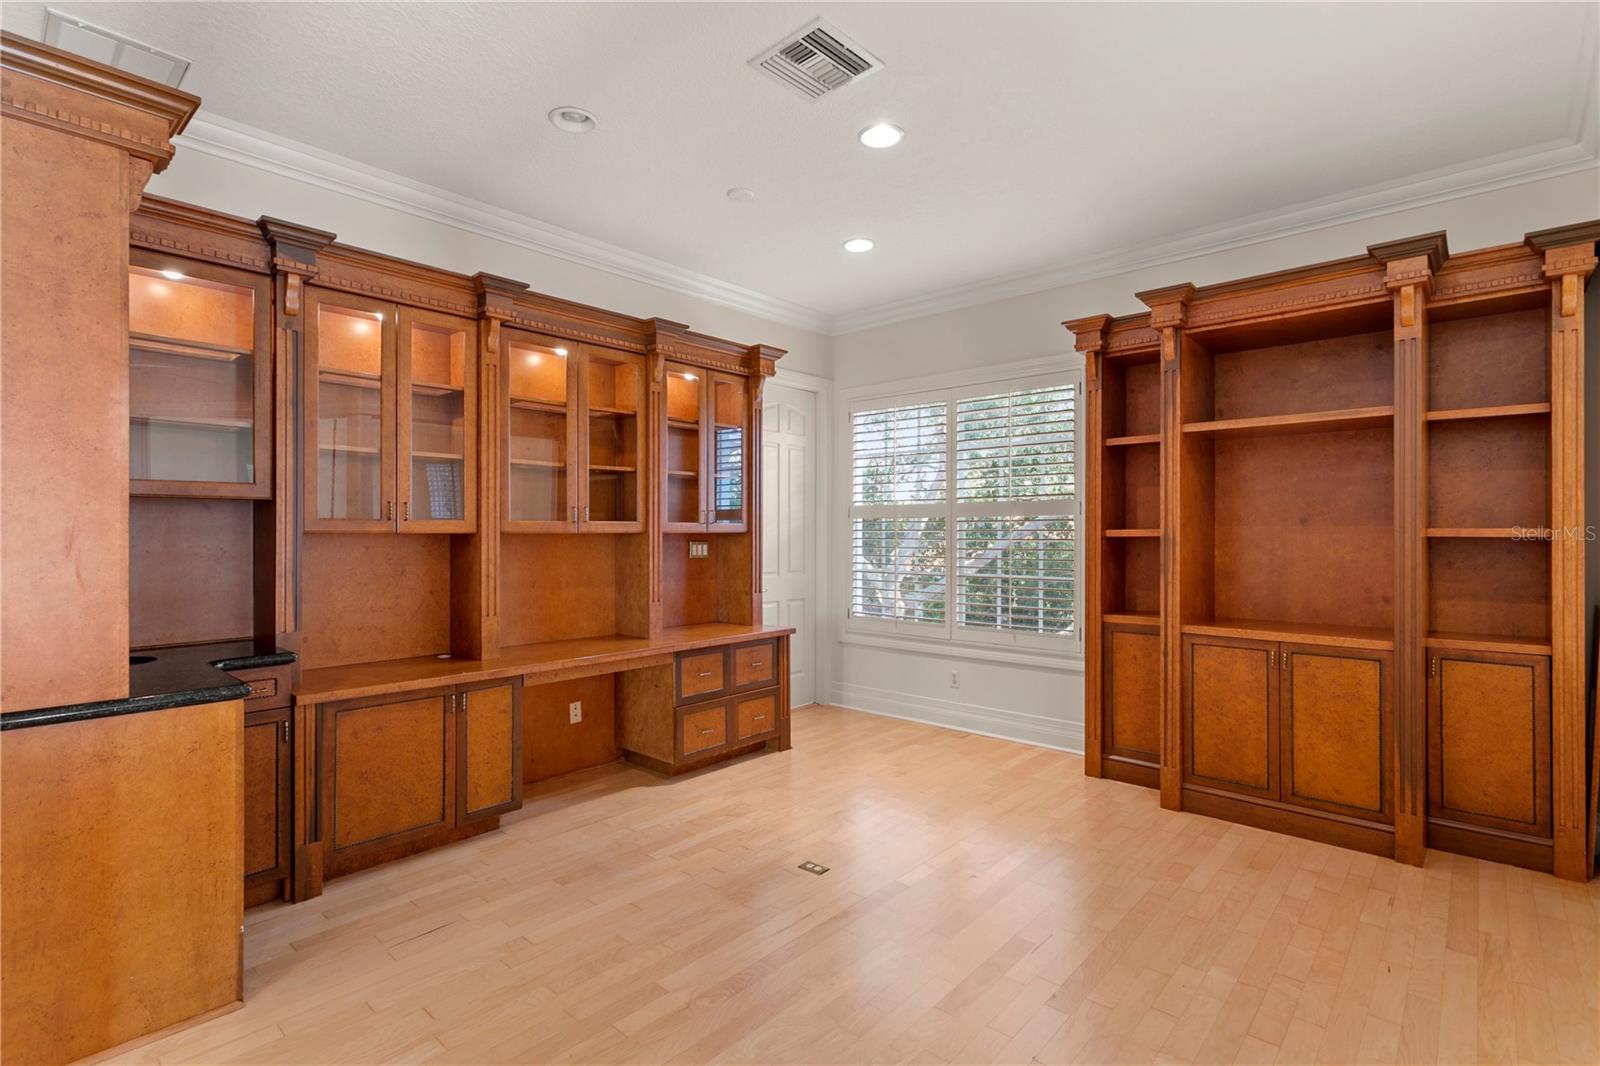 Executive Office with Custom Wood Cabinetry